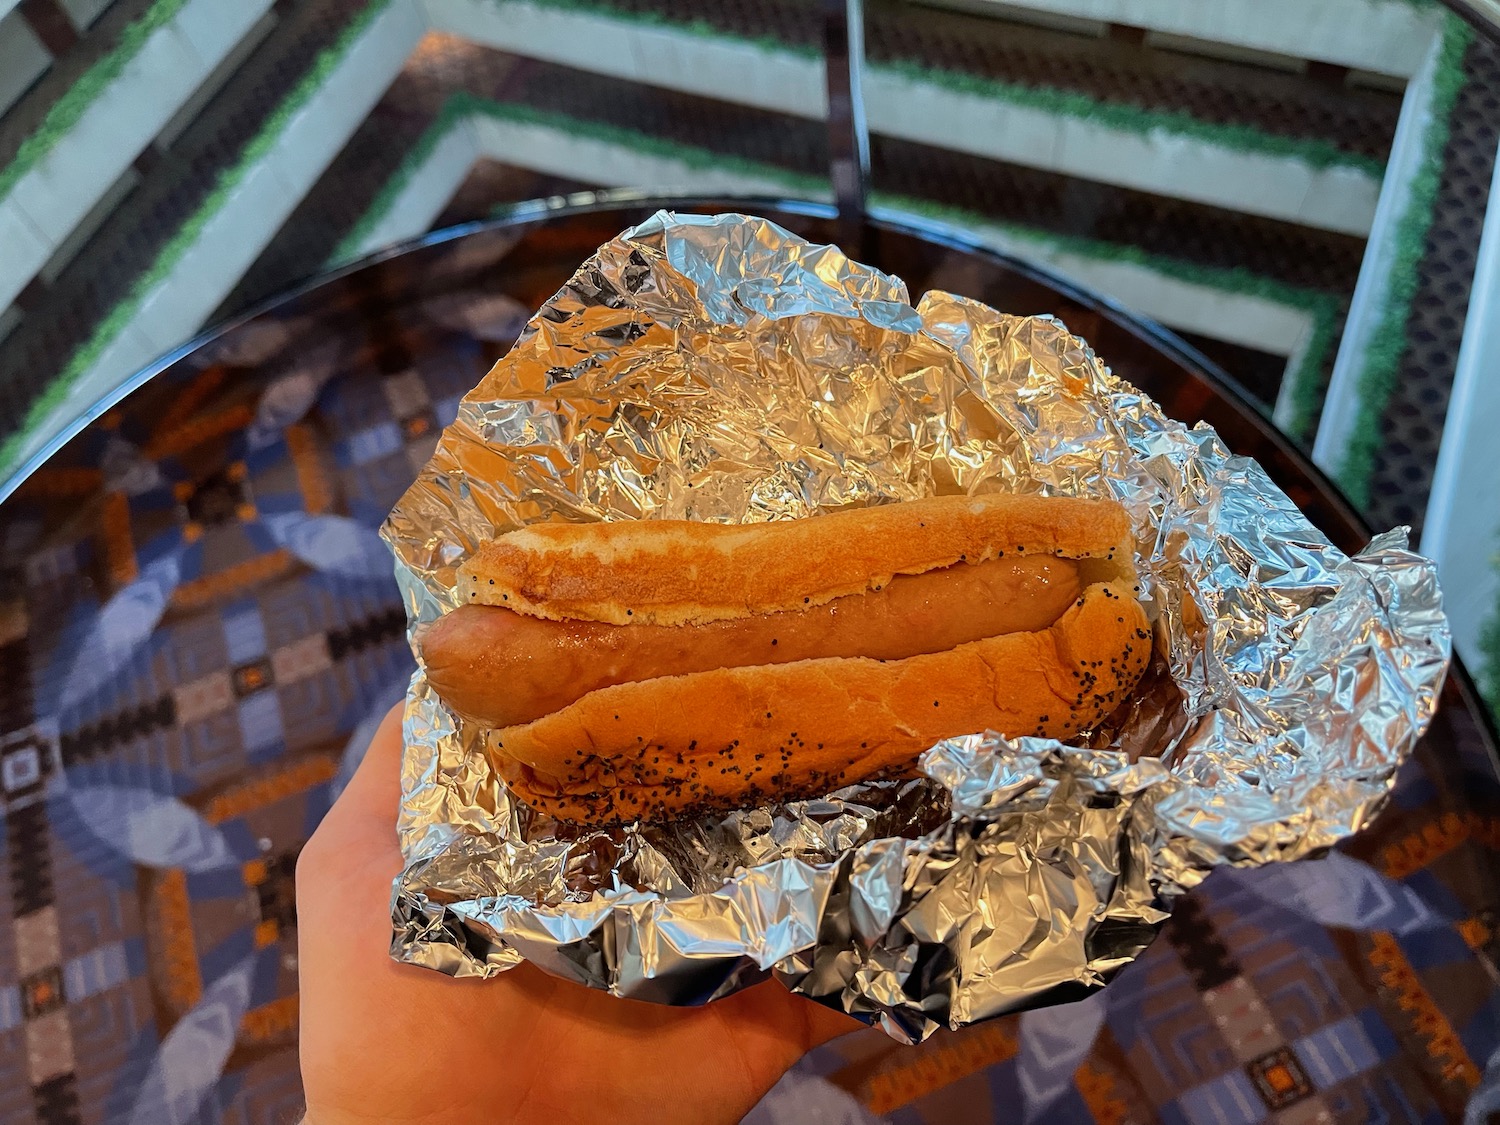 a hand holding a hot dog in foil